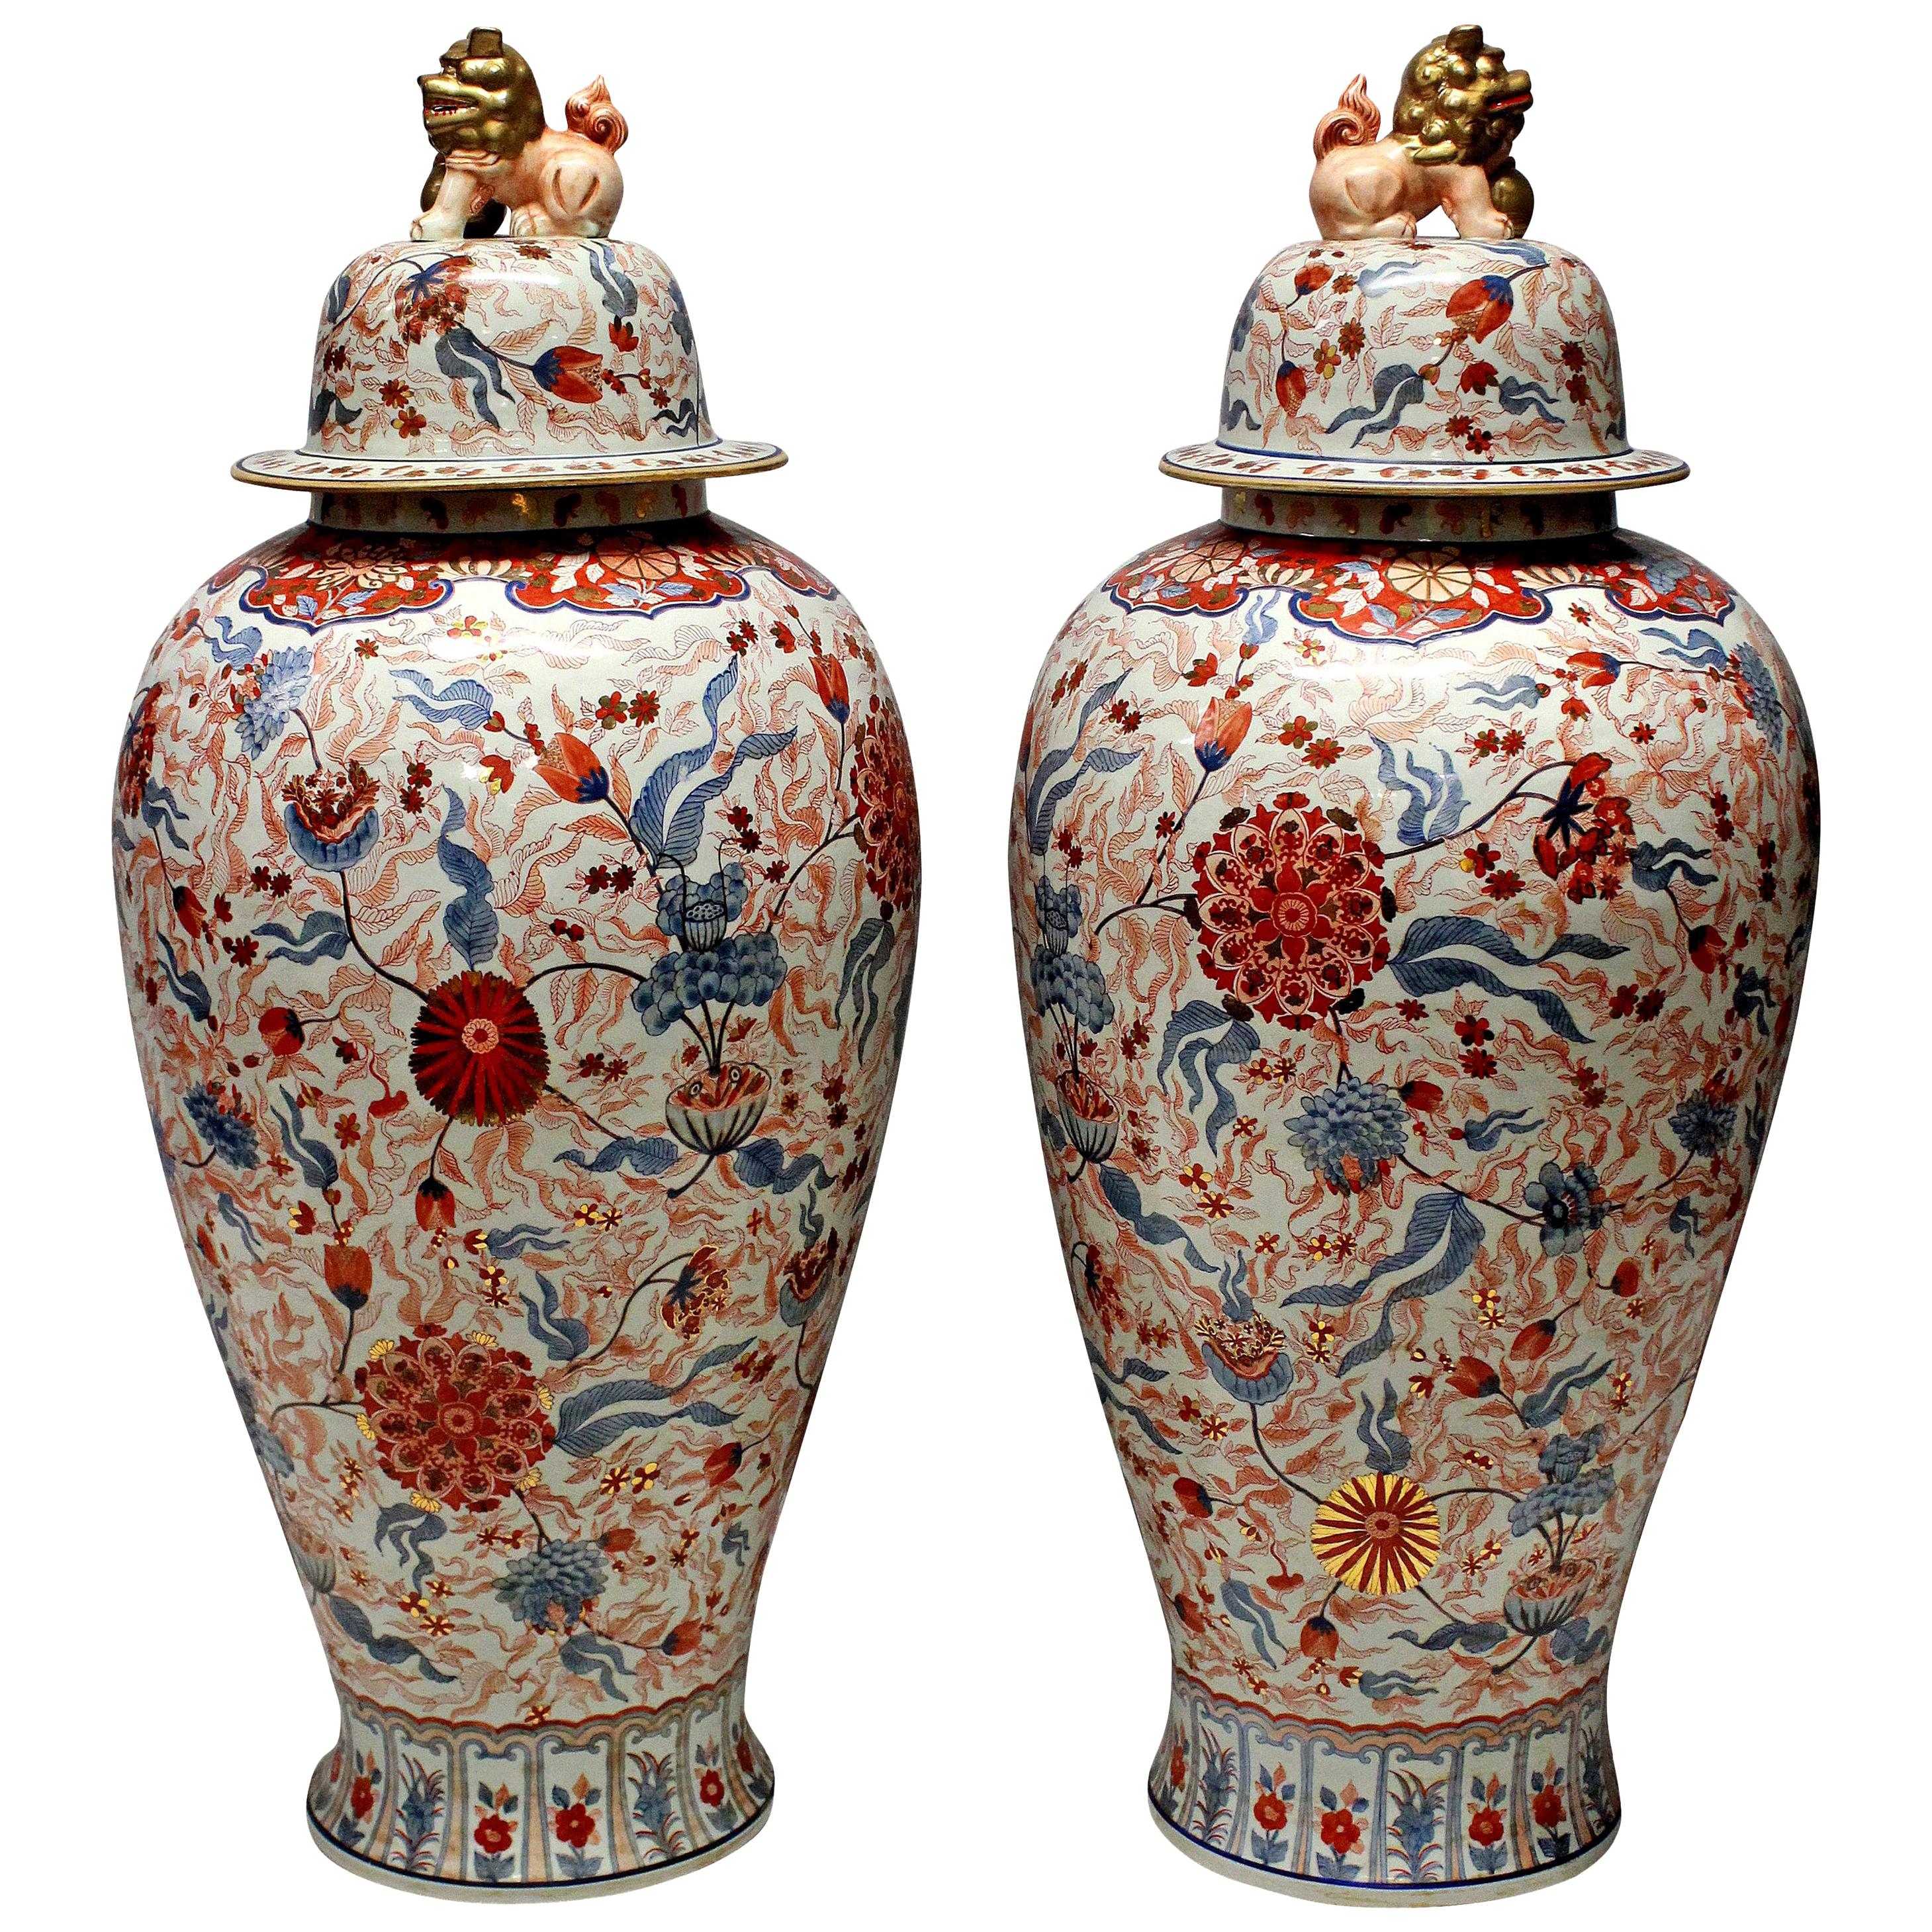 Large and Impressive Pair of Imari Floor Vases with Covers